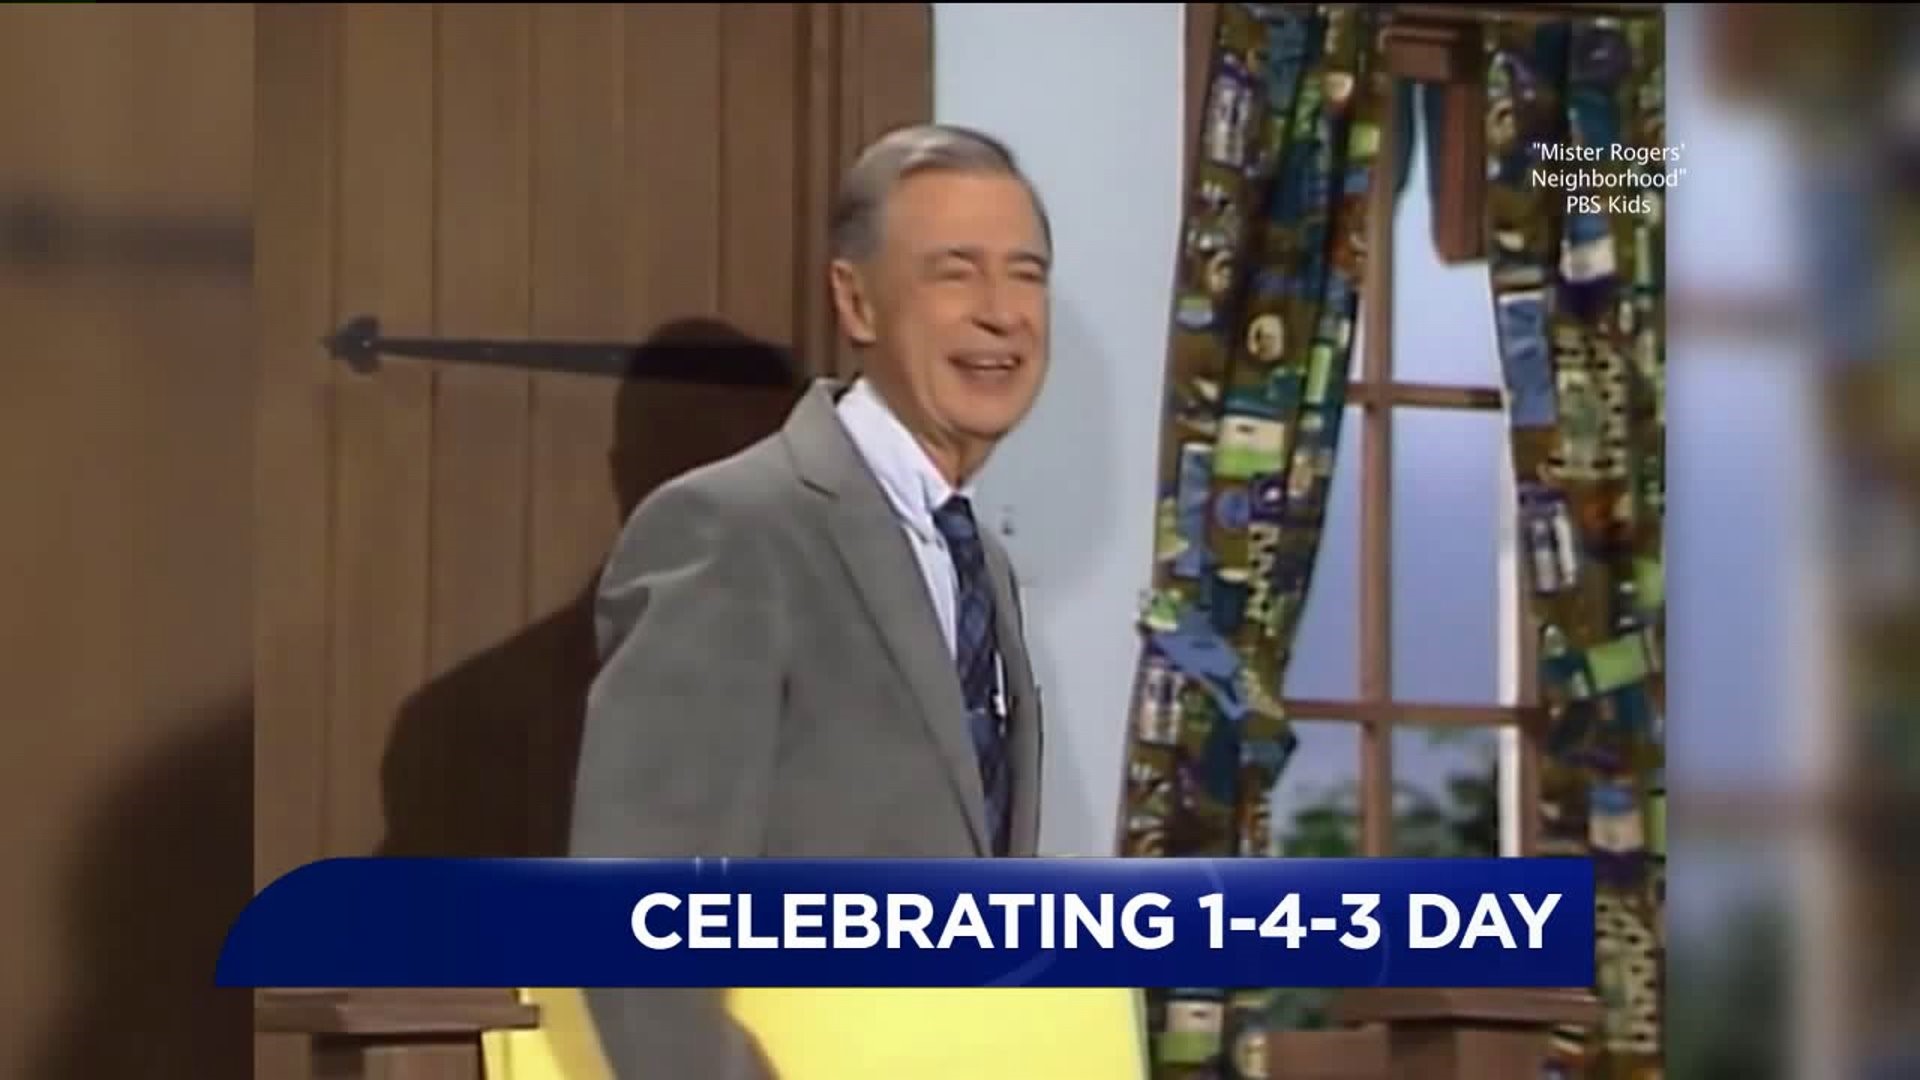 '1-4-3 Day' Honors Mister Rogers